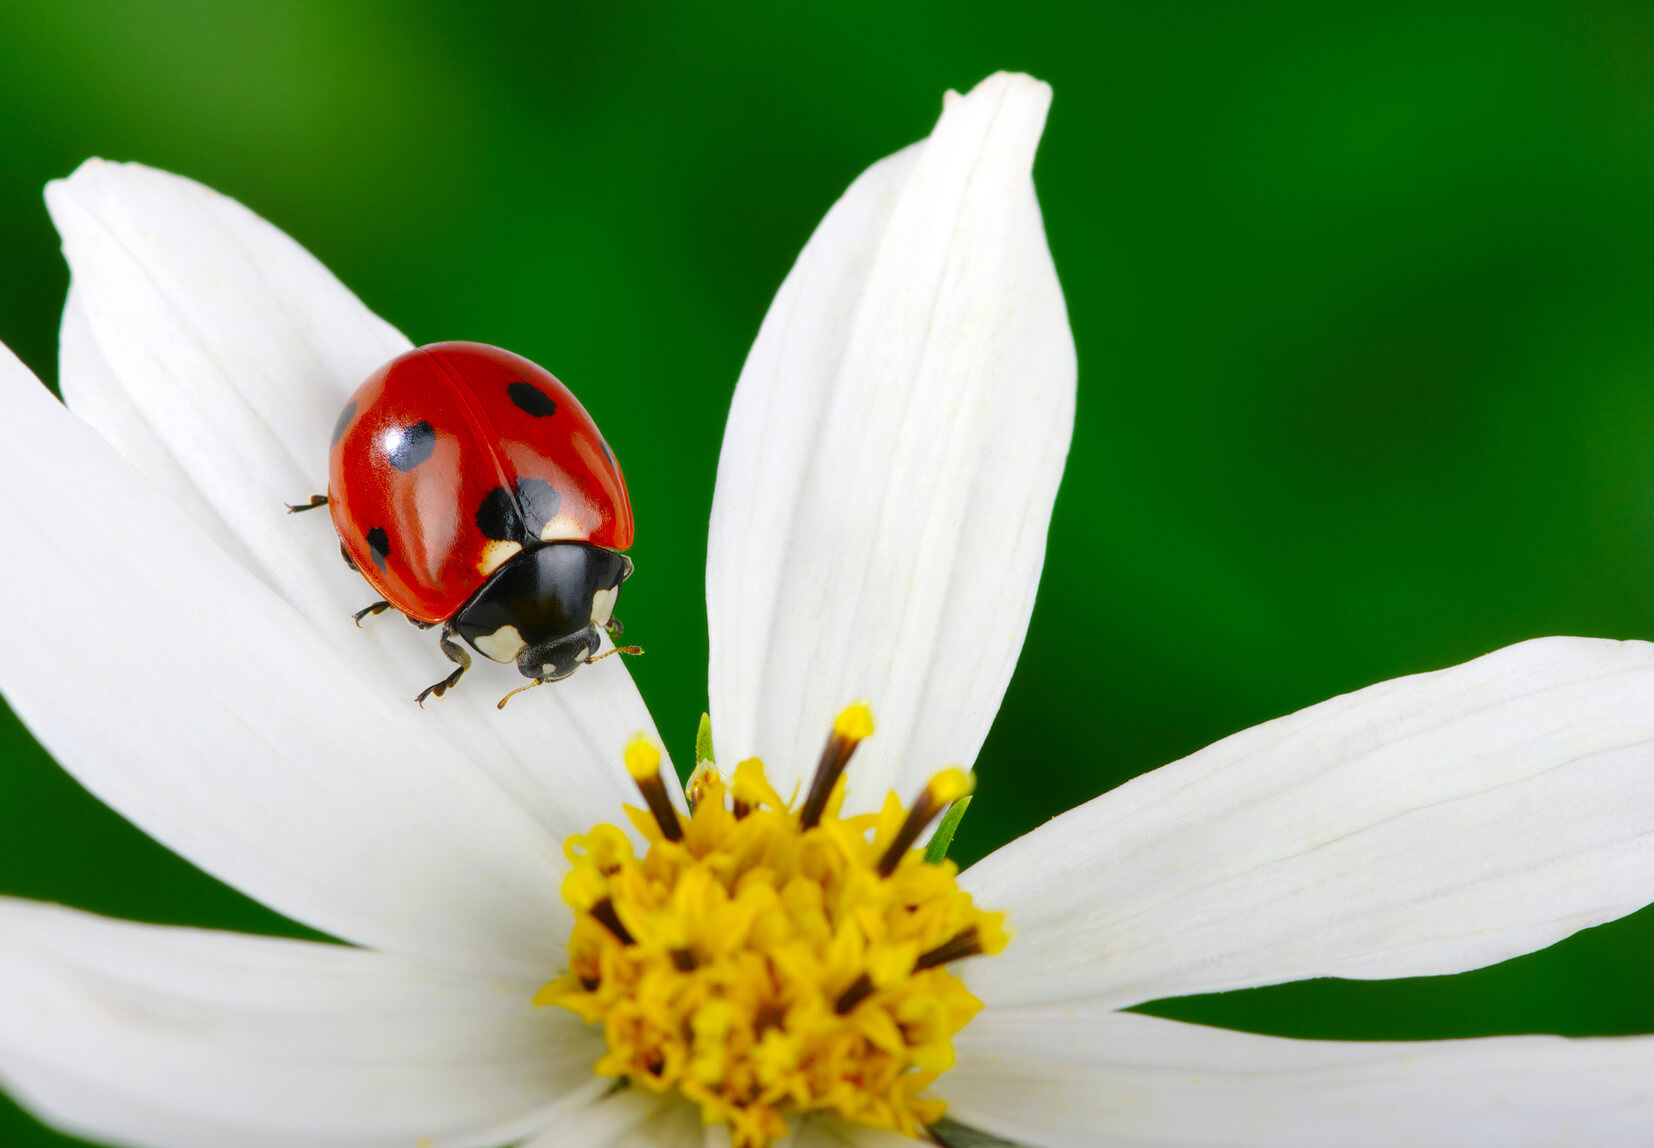 7 Interesting Facts About Lady Bugs